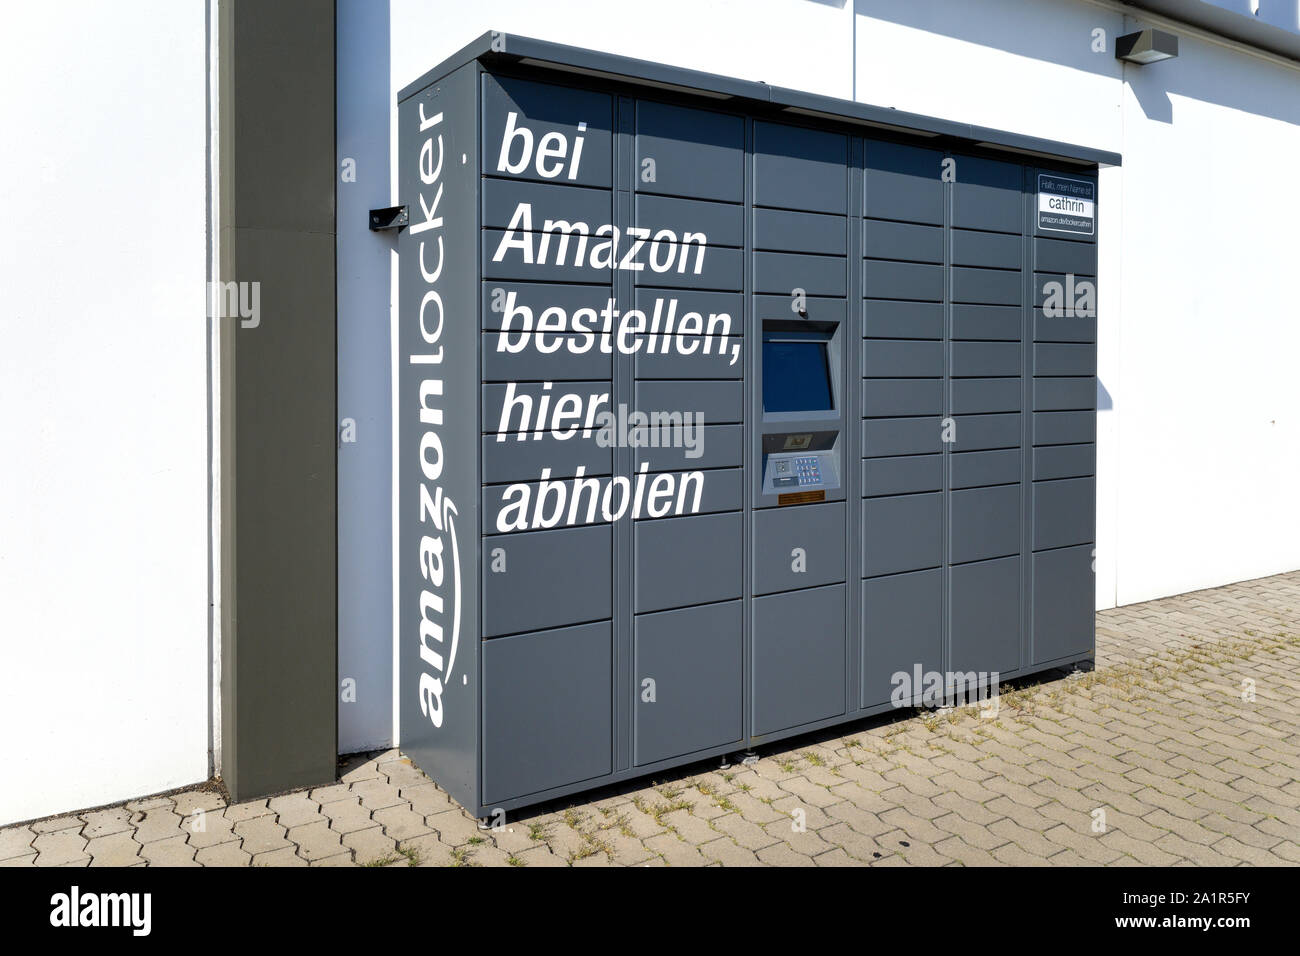 Amazon Locker, a self-service parcel delivery service offered by online retailer Amazon. Stock Photo